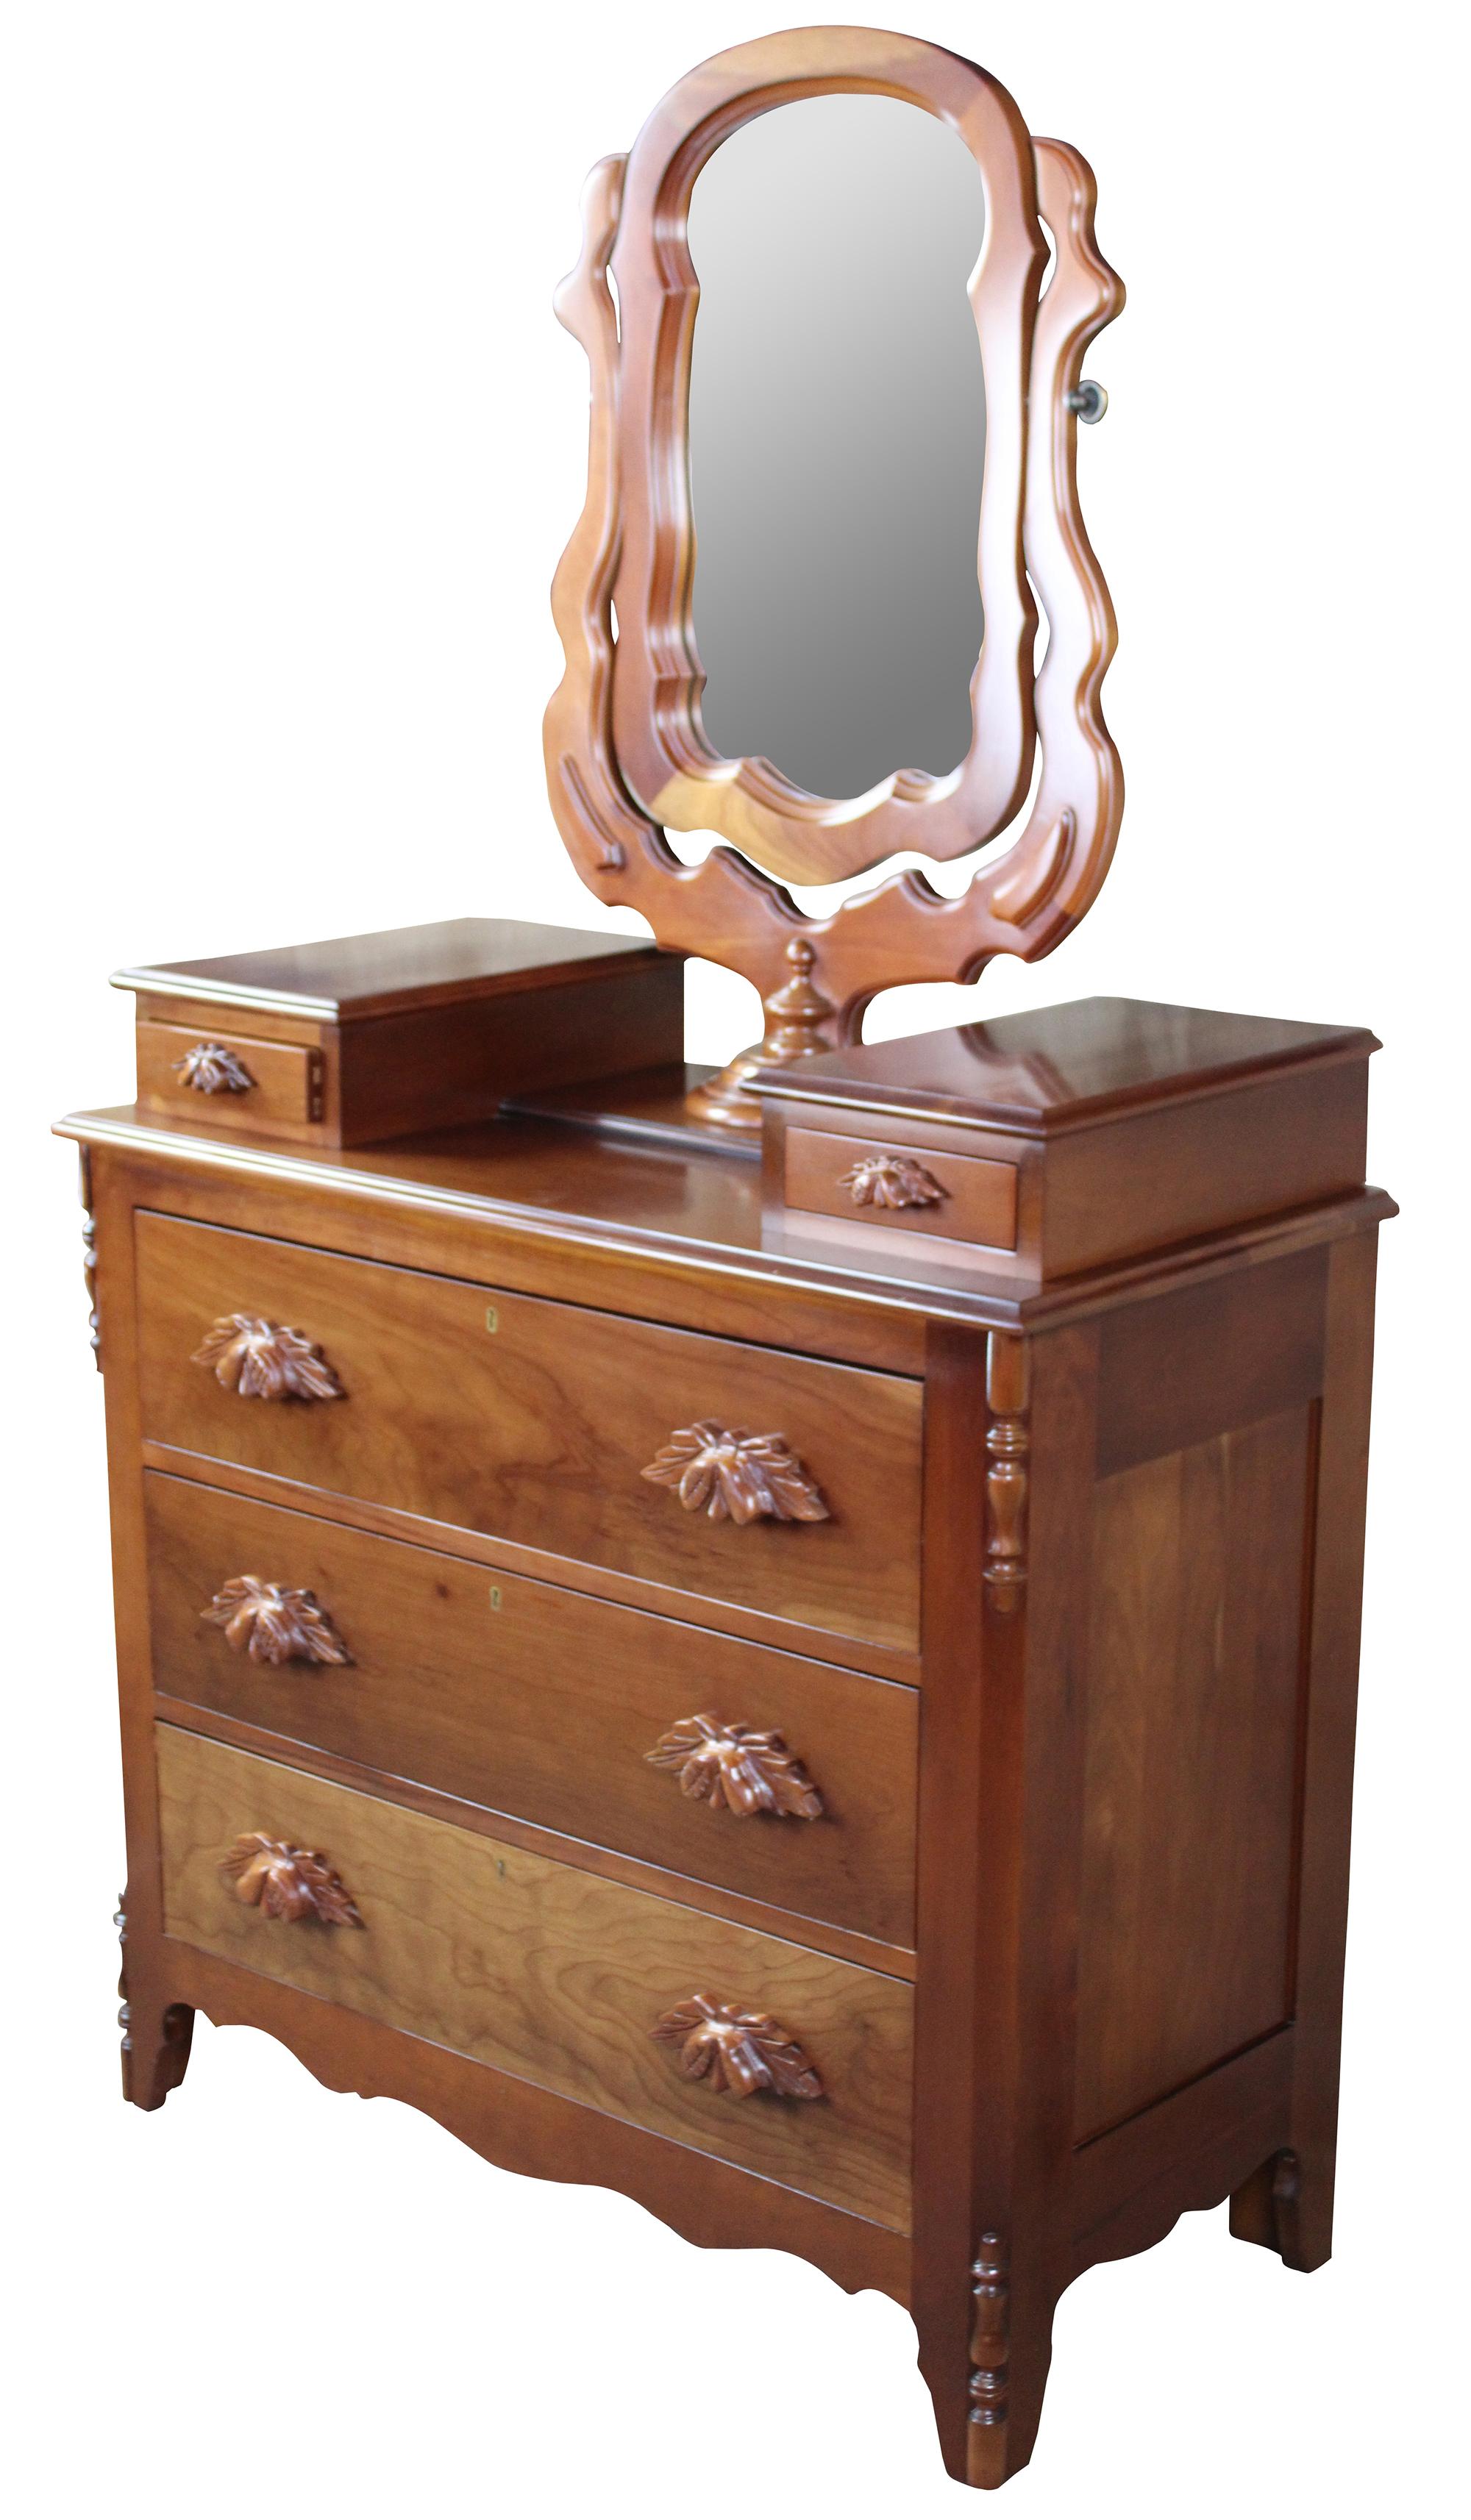 Vintage Cassady Furniture Co solid cherry Victorian dresser with wishbone mirror. A Victorian reproduction featuring three dovetailed lower drawers, two glove boxes and a swivel vanity mirror. Cassady Furniture is out of Bowling Green Kentucky,